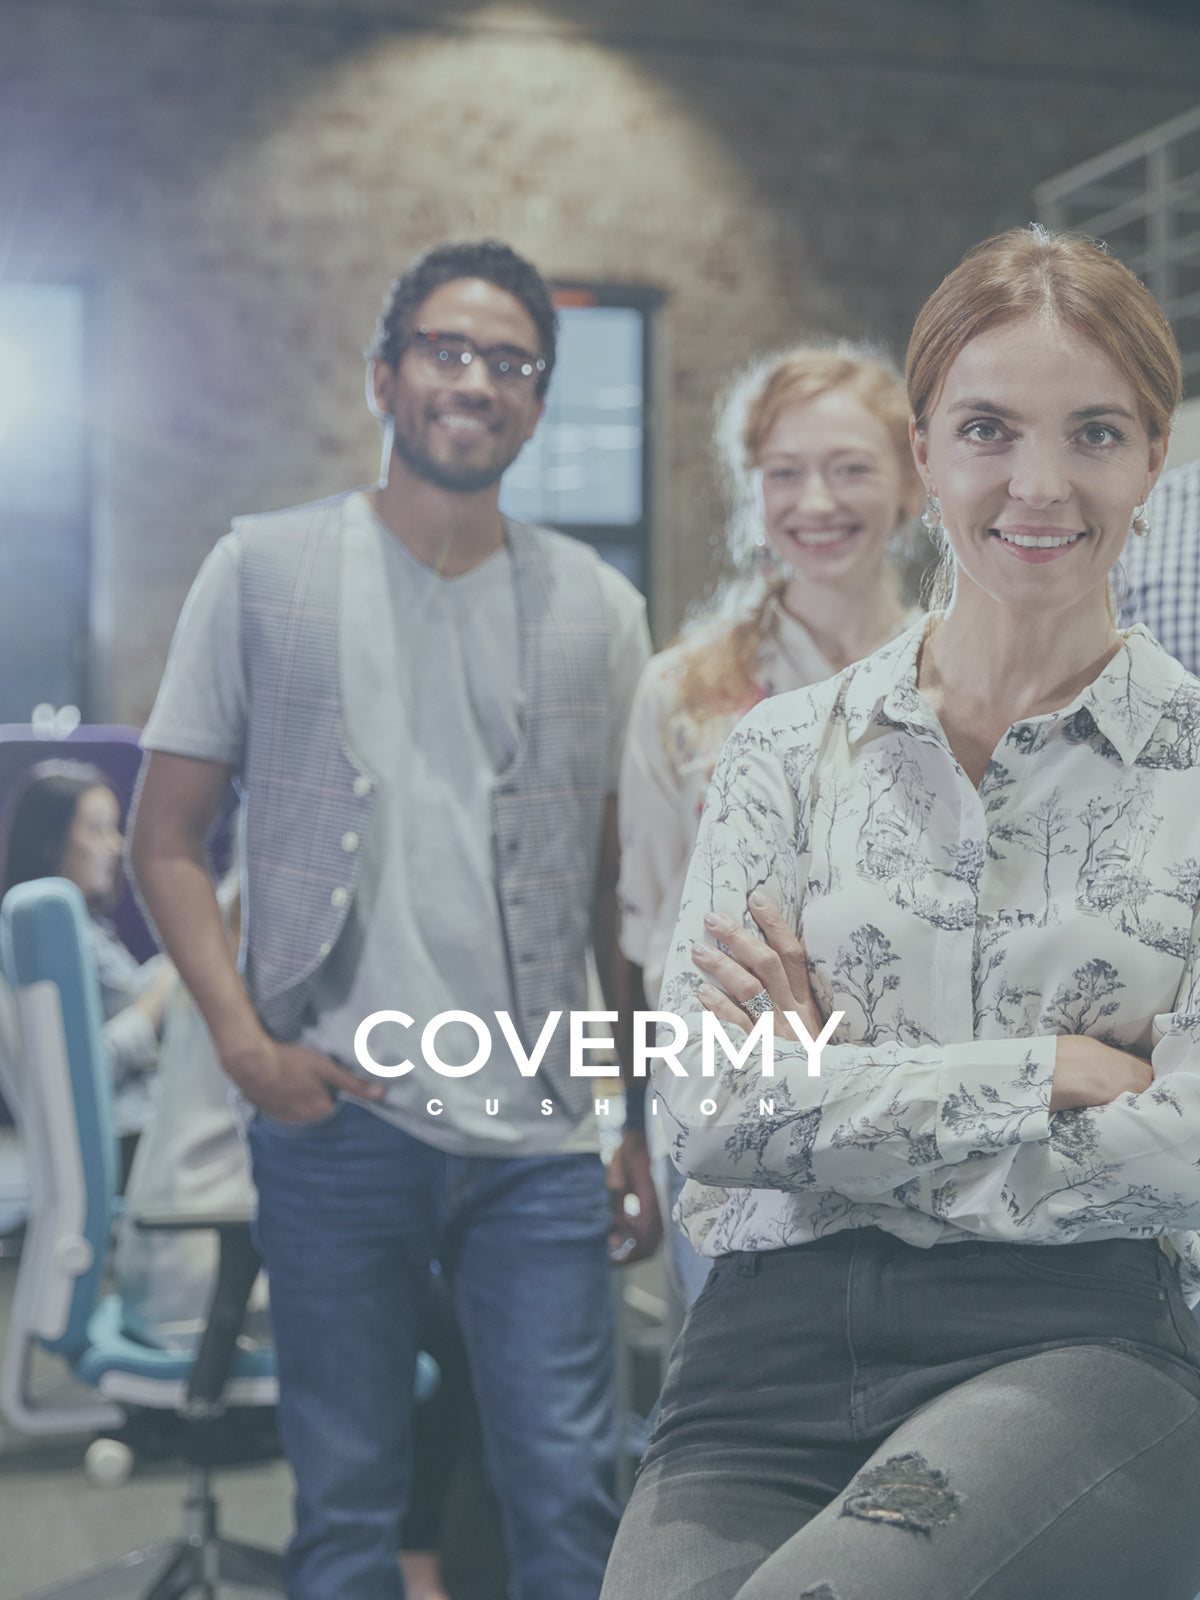 team of CovermyCushion